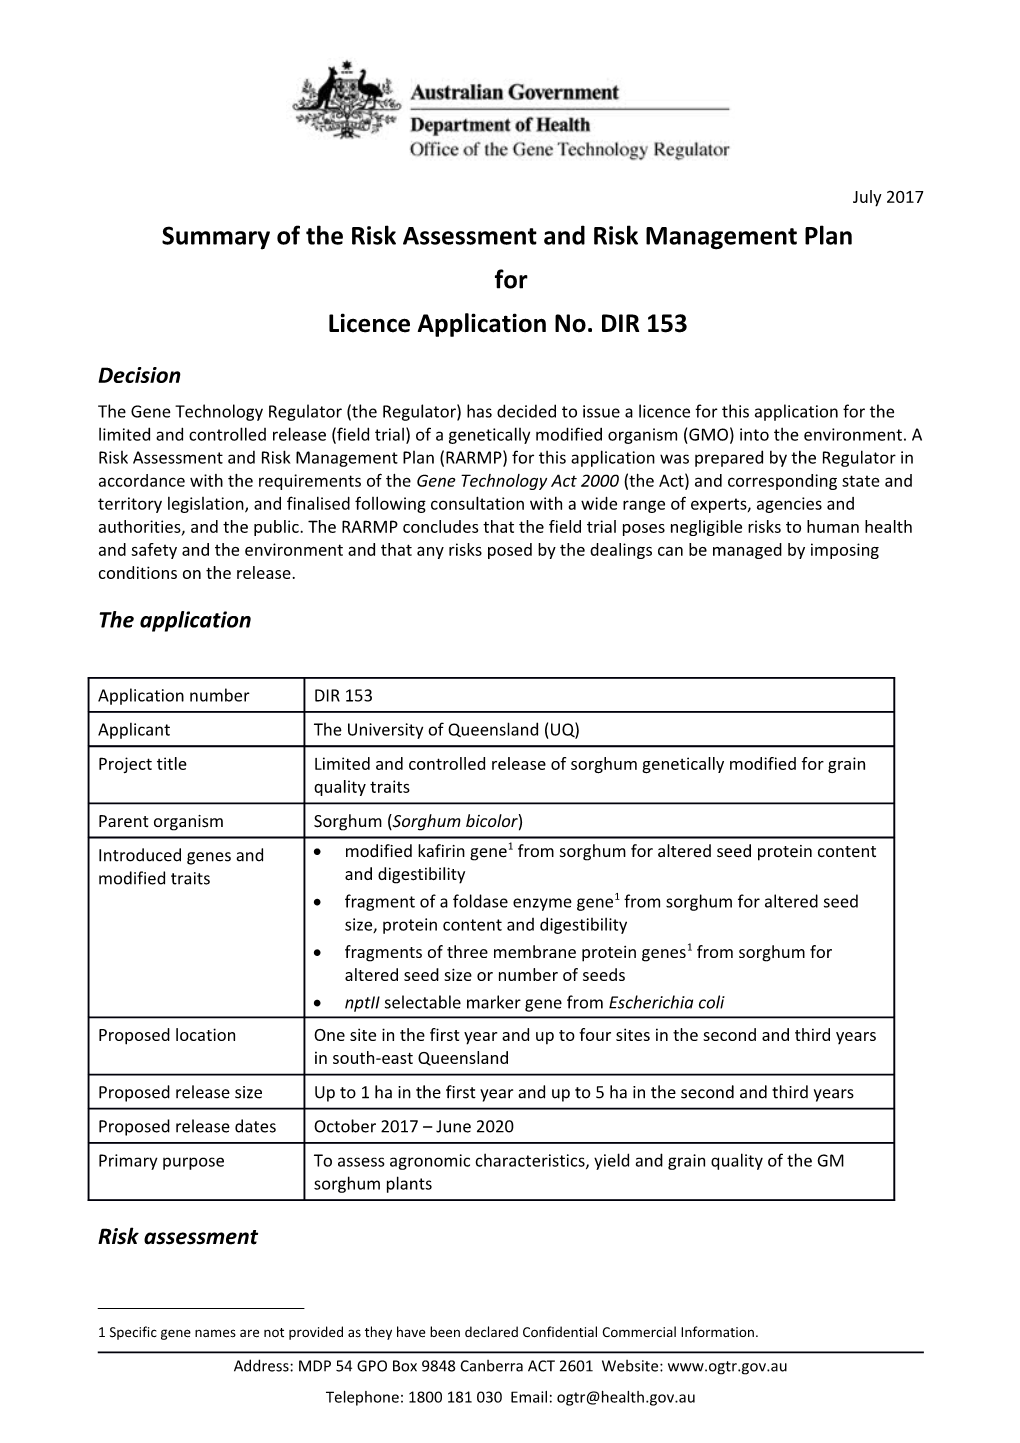 DIR 153 - Summary of Risk Assessment and Risk Management Plan